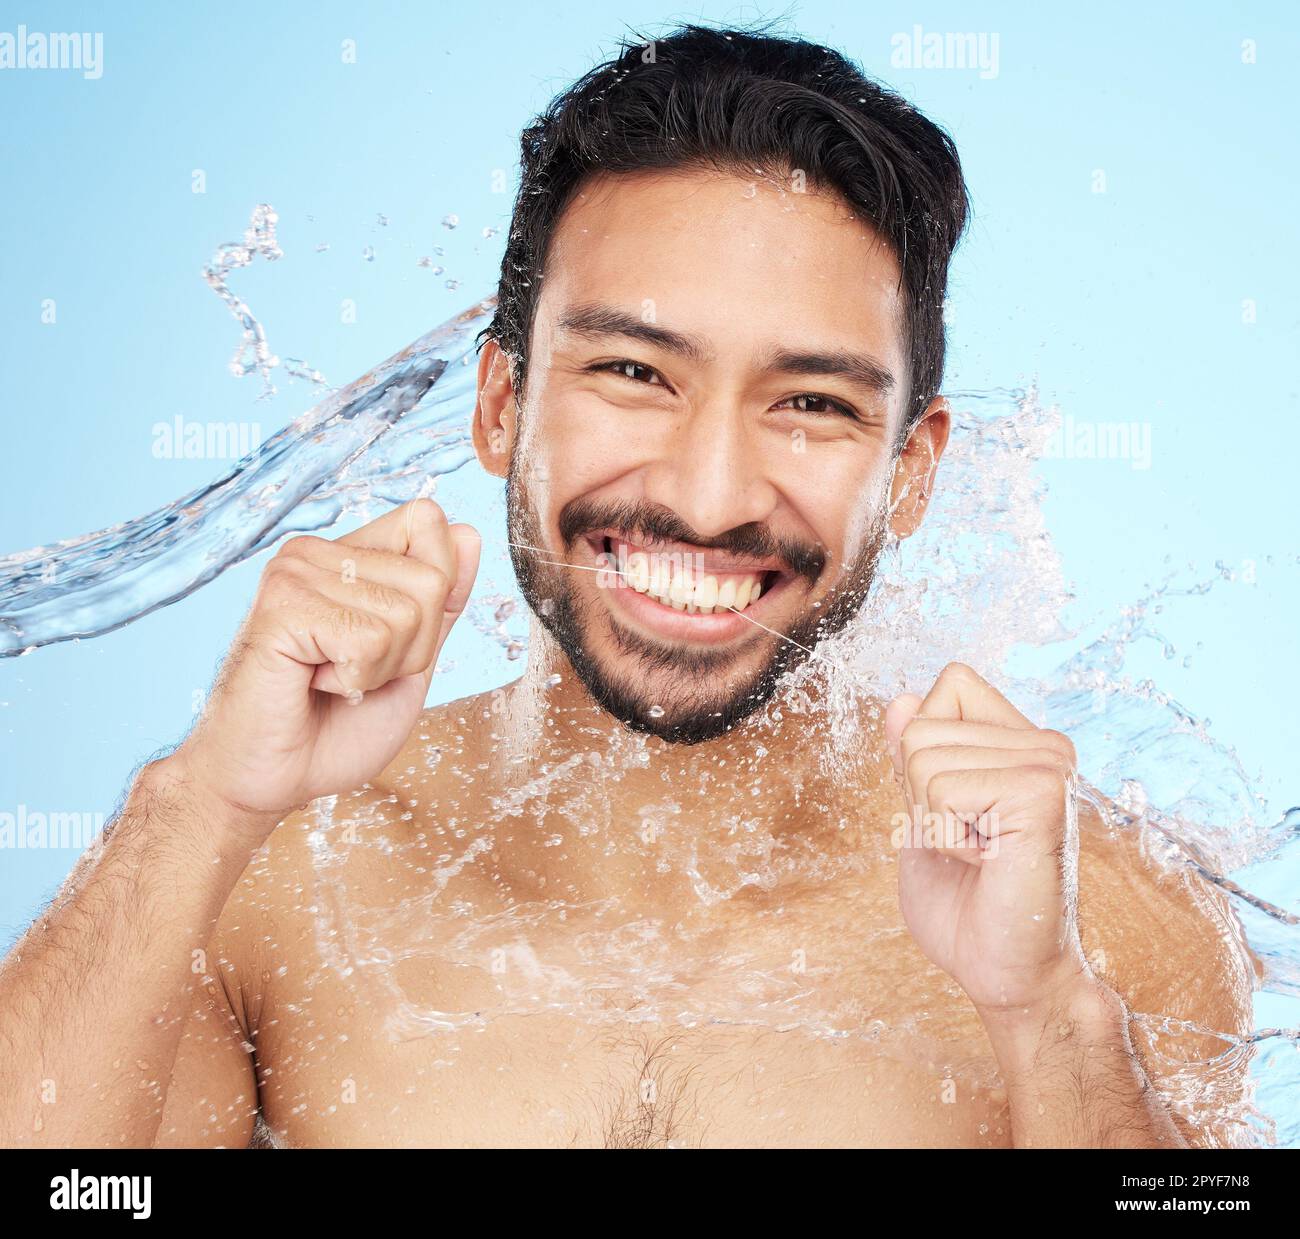 Dental, teeth floss and water splash with man in portrait for hygiene, cleaning and oral healthcare against studio background. Teeth whitening, clean mouth and fresh breath with smile and Invisalign Stock Photo